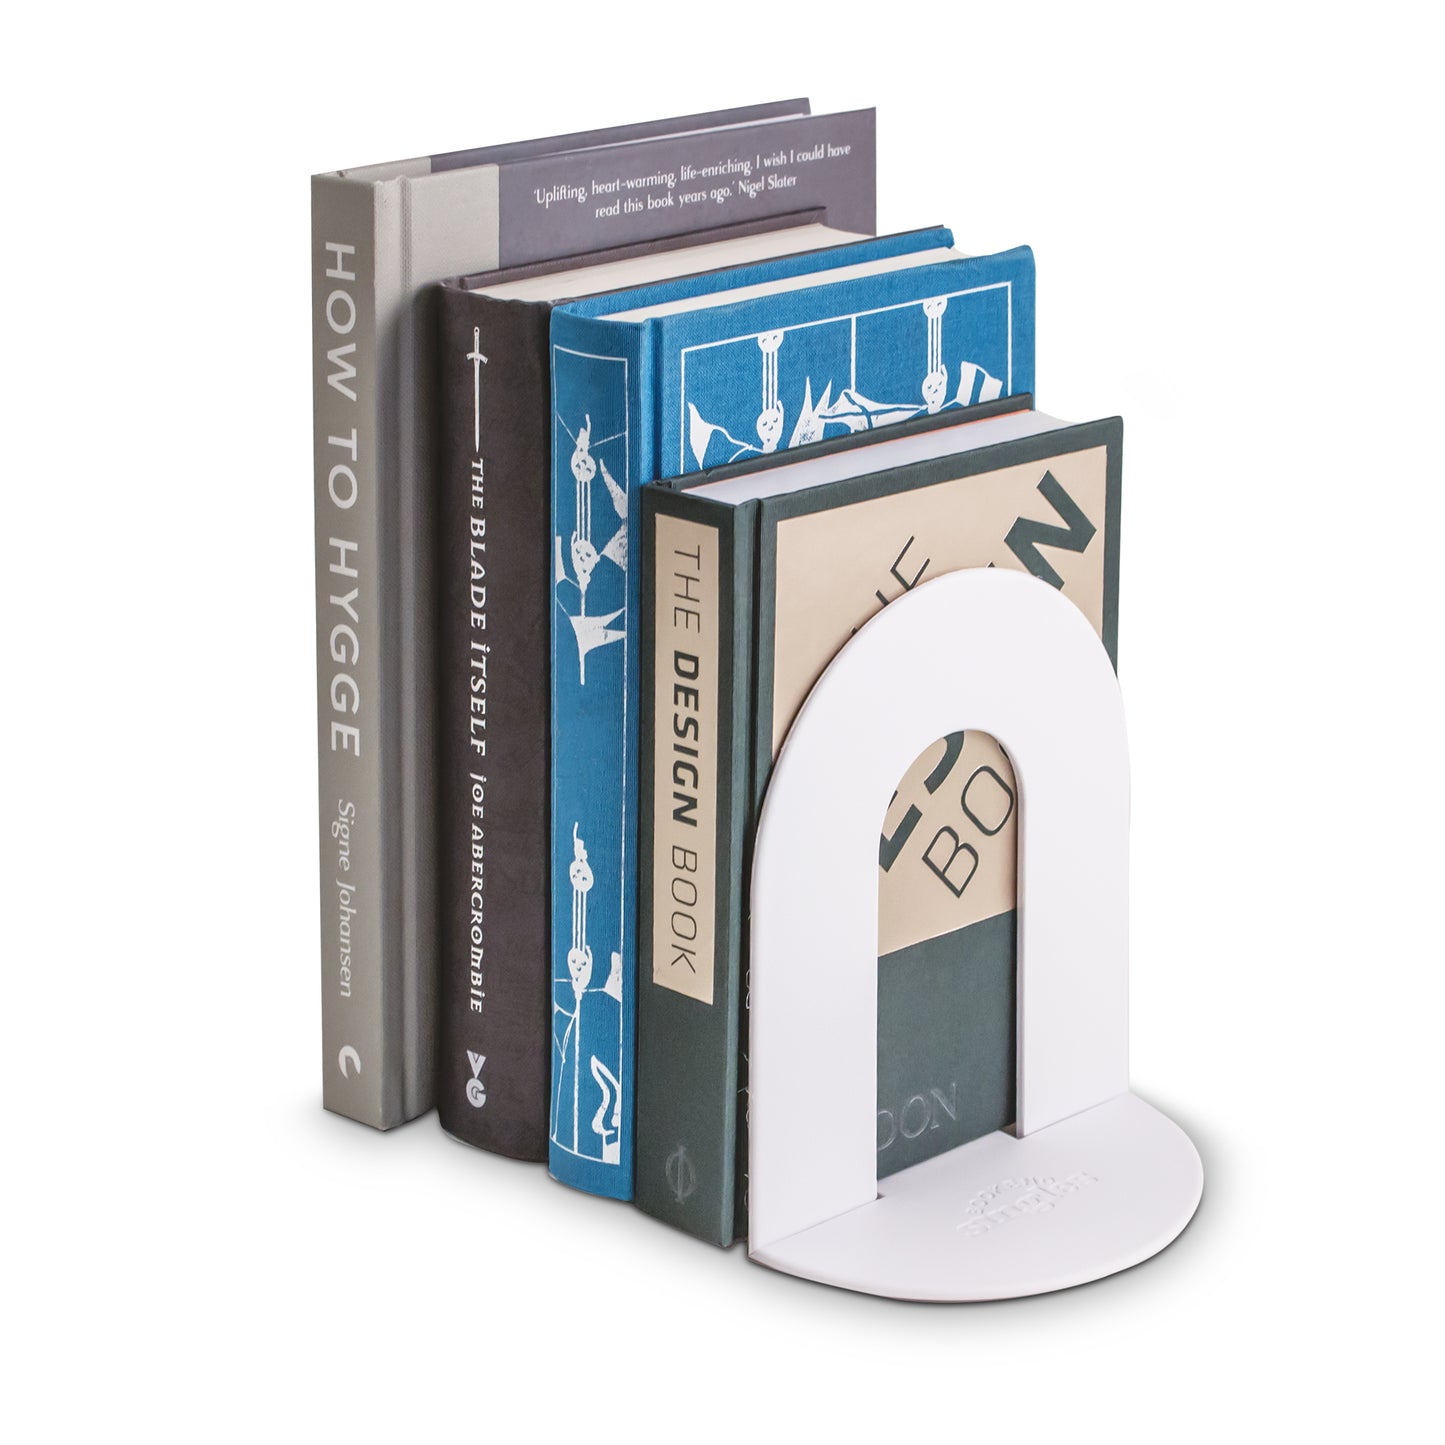 The Pop Up Book End